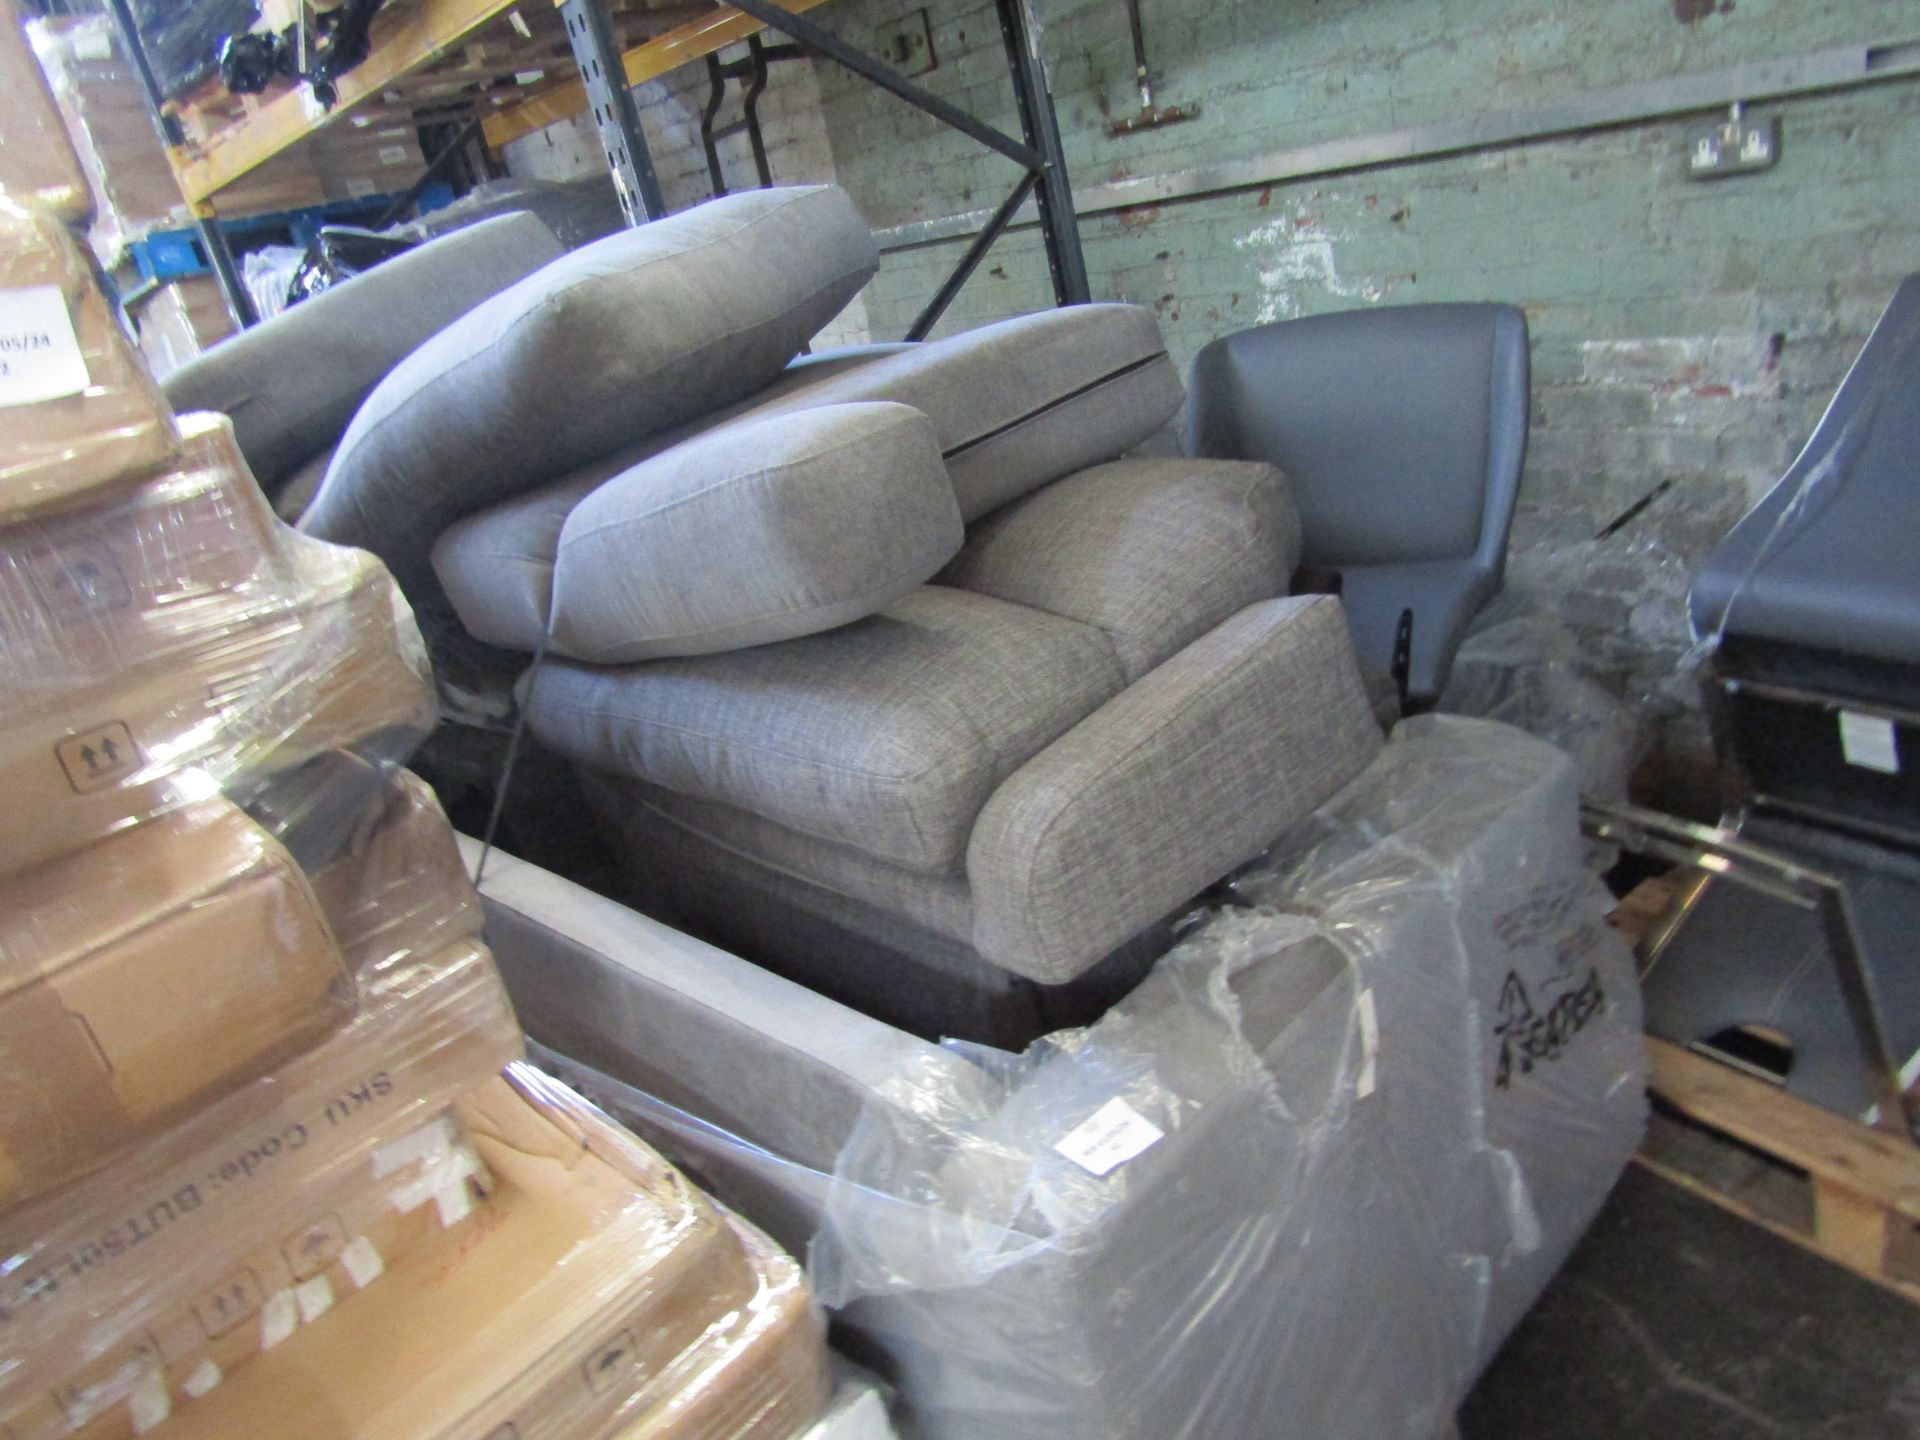 4 x DFS Ex-Retail Customer Returns Mixed Lot - Total RRP est. 3196About the Product(s) This lot